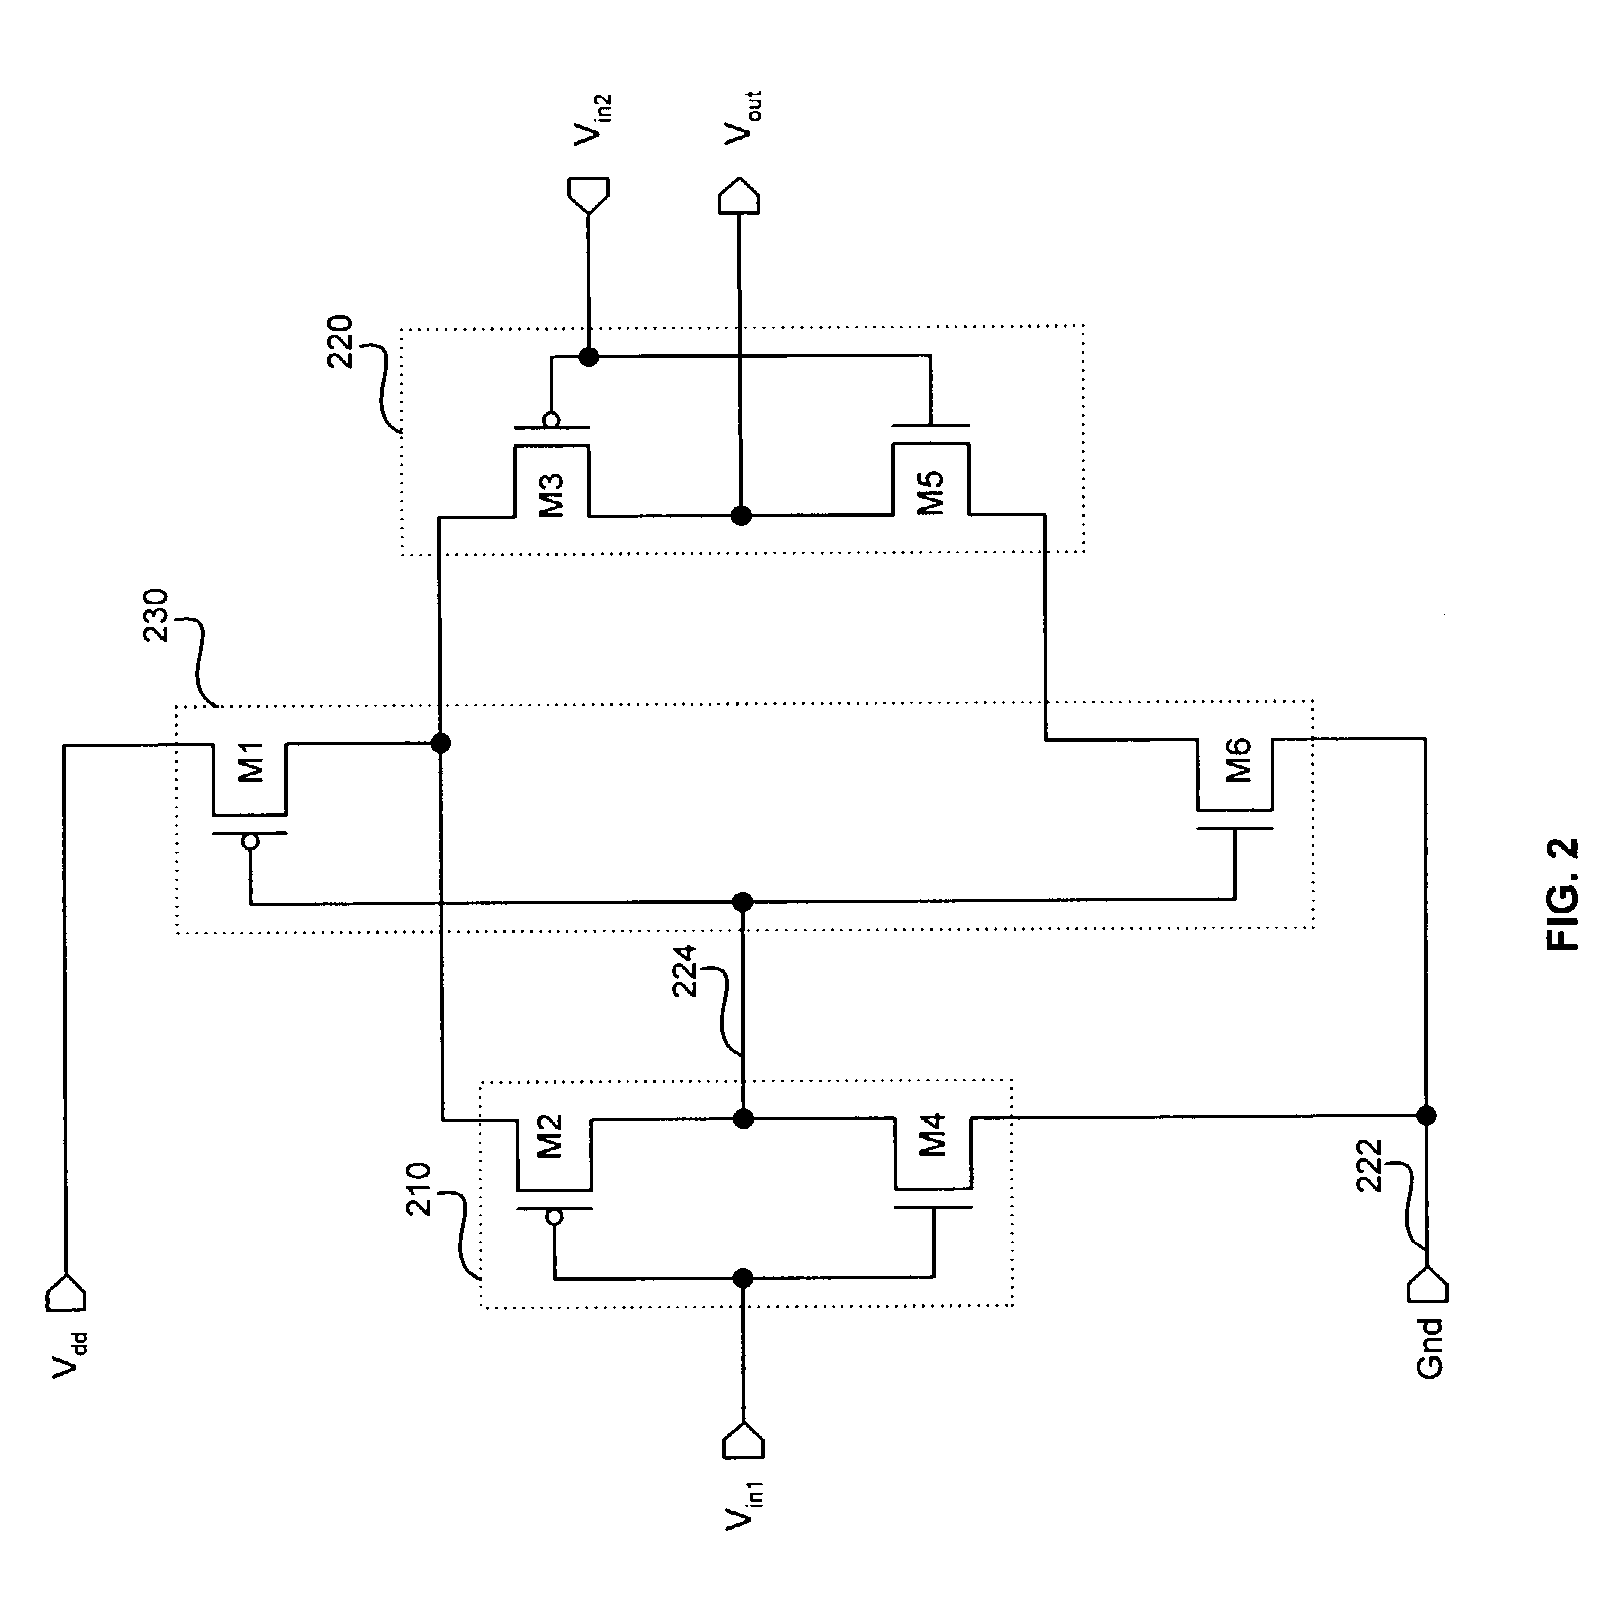 Apparatus for a differential self-biasing CMOS amplifier